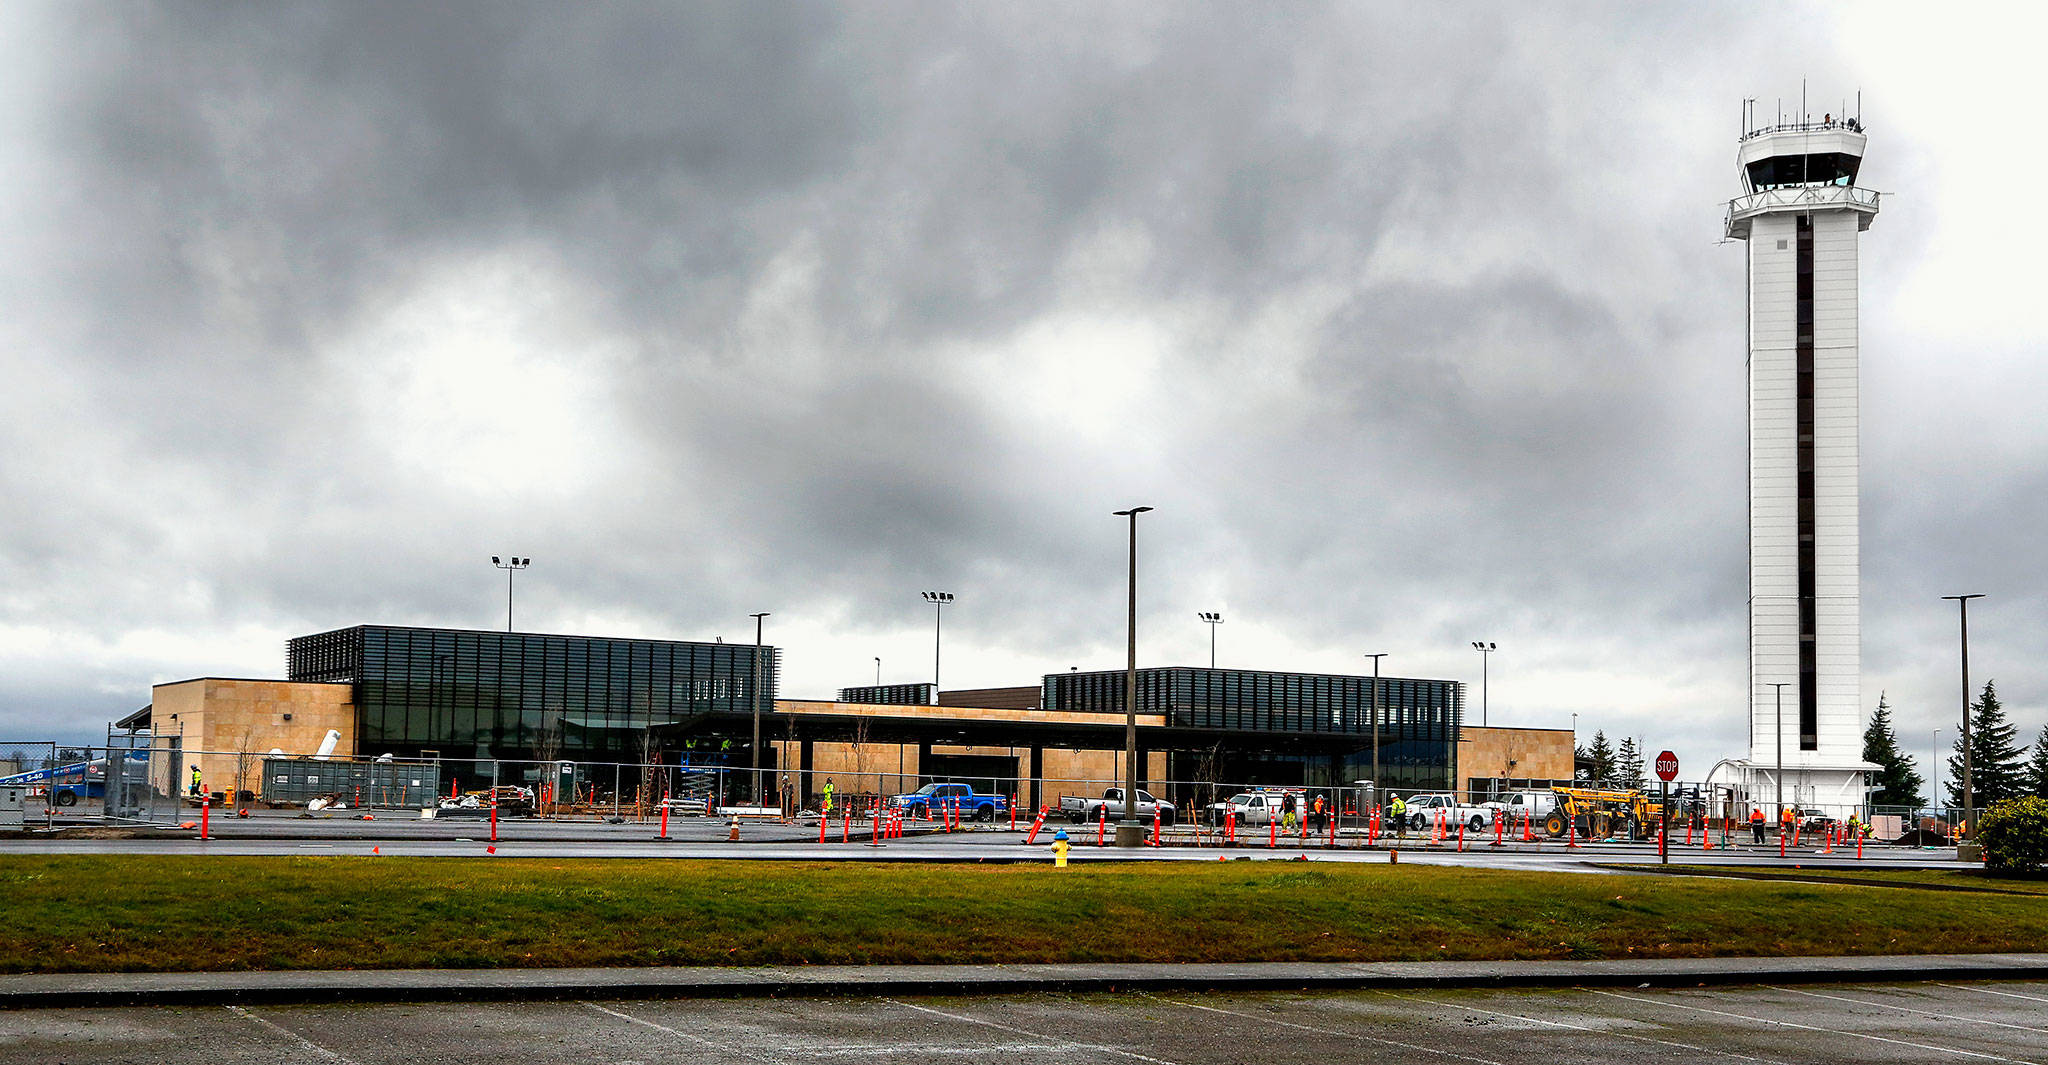 Workers continue to put finishing touches on the new Paine Field passenger terminal at the Snohomish County Airport Thursday. Commercial flights will start next month from the terminal, which is owned by Propeller Airports. (Dan Bates / The Herald)